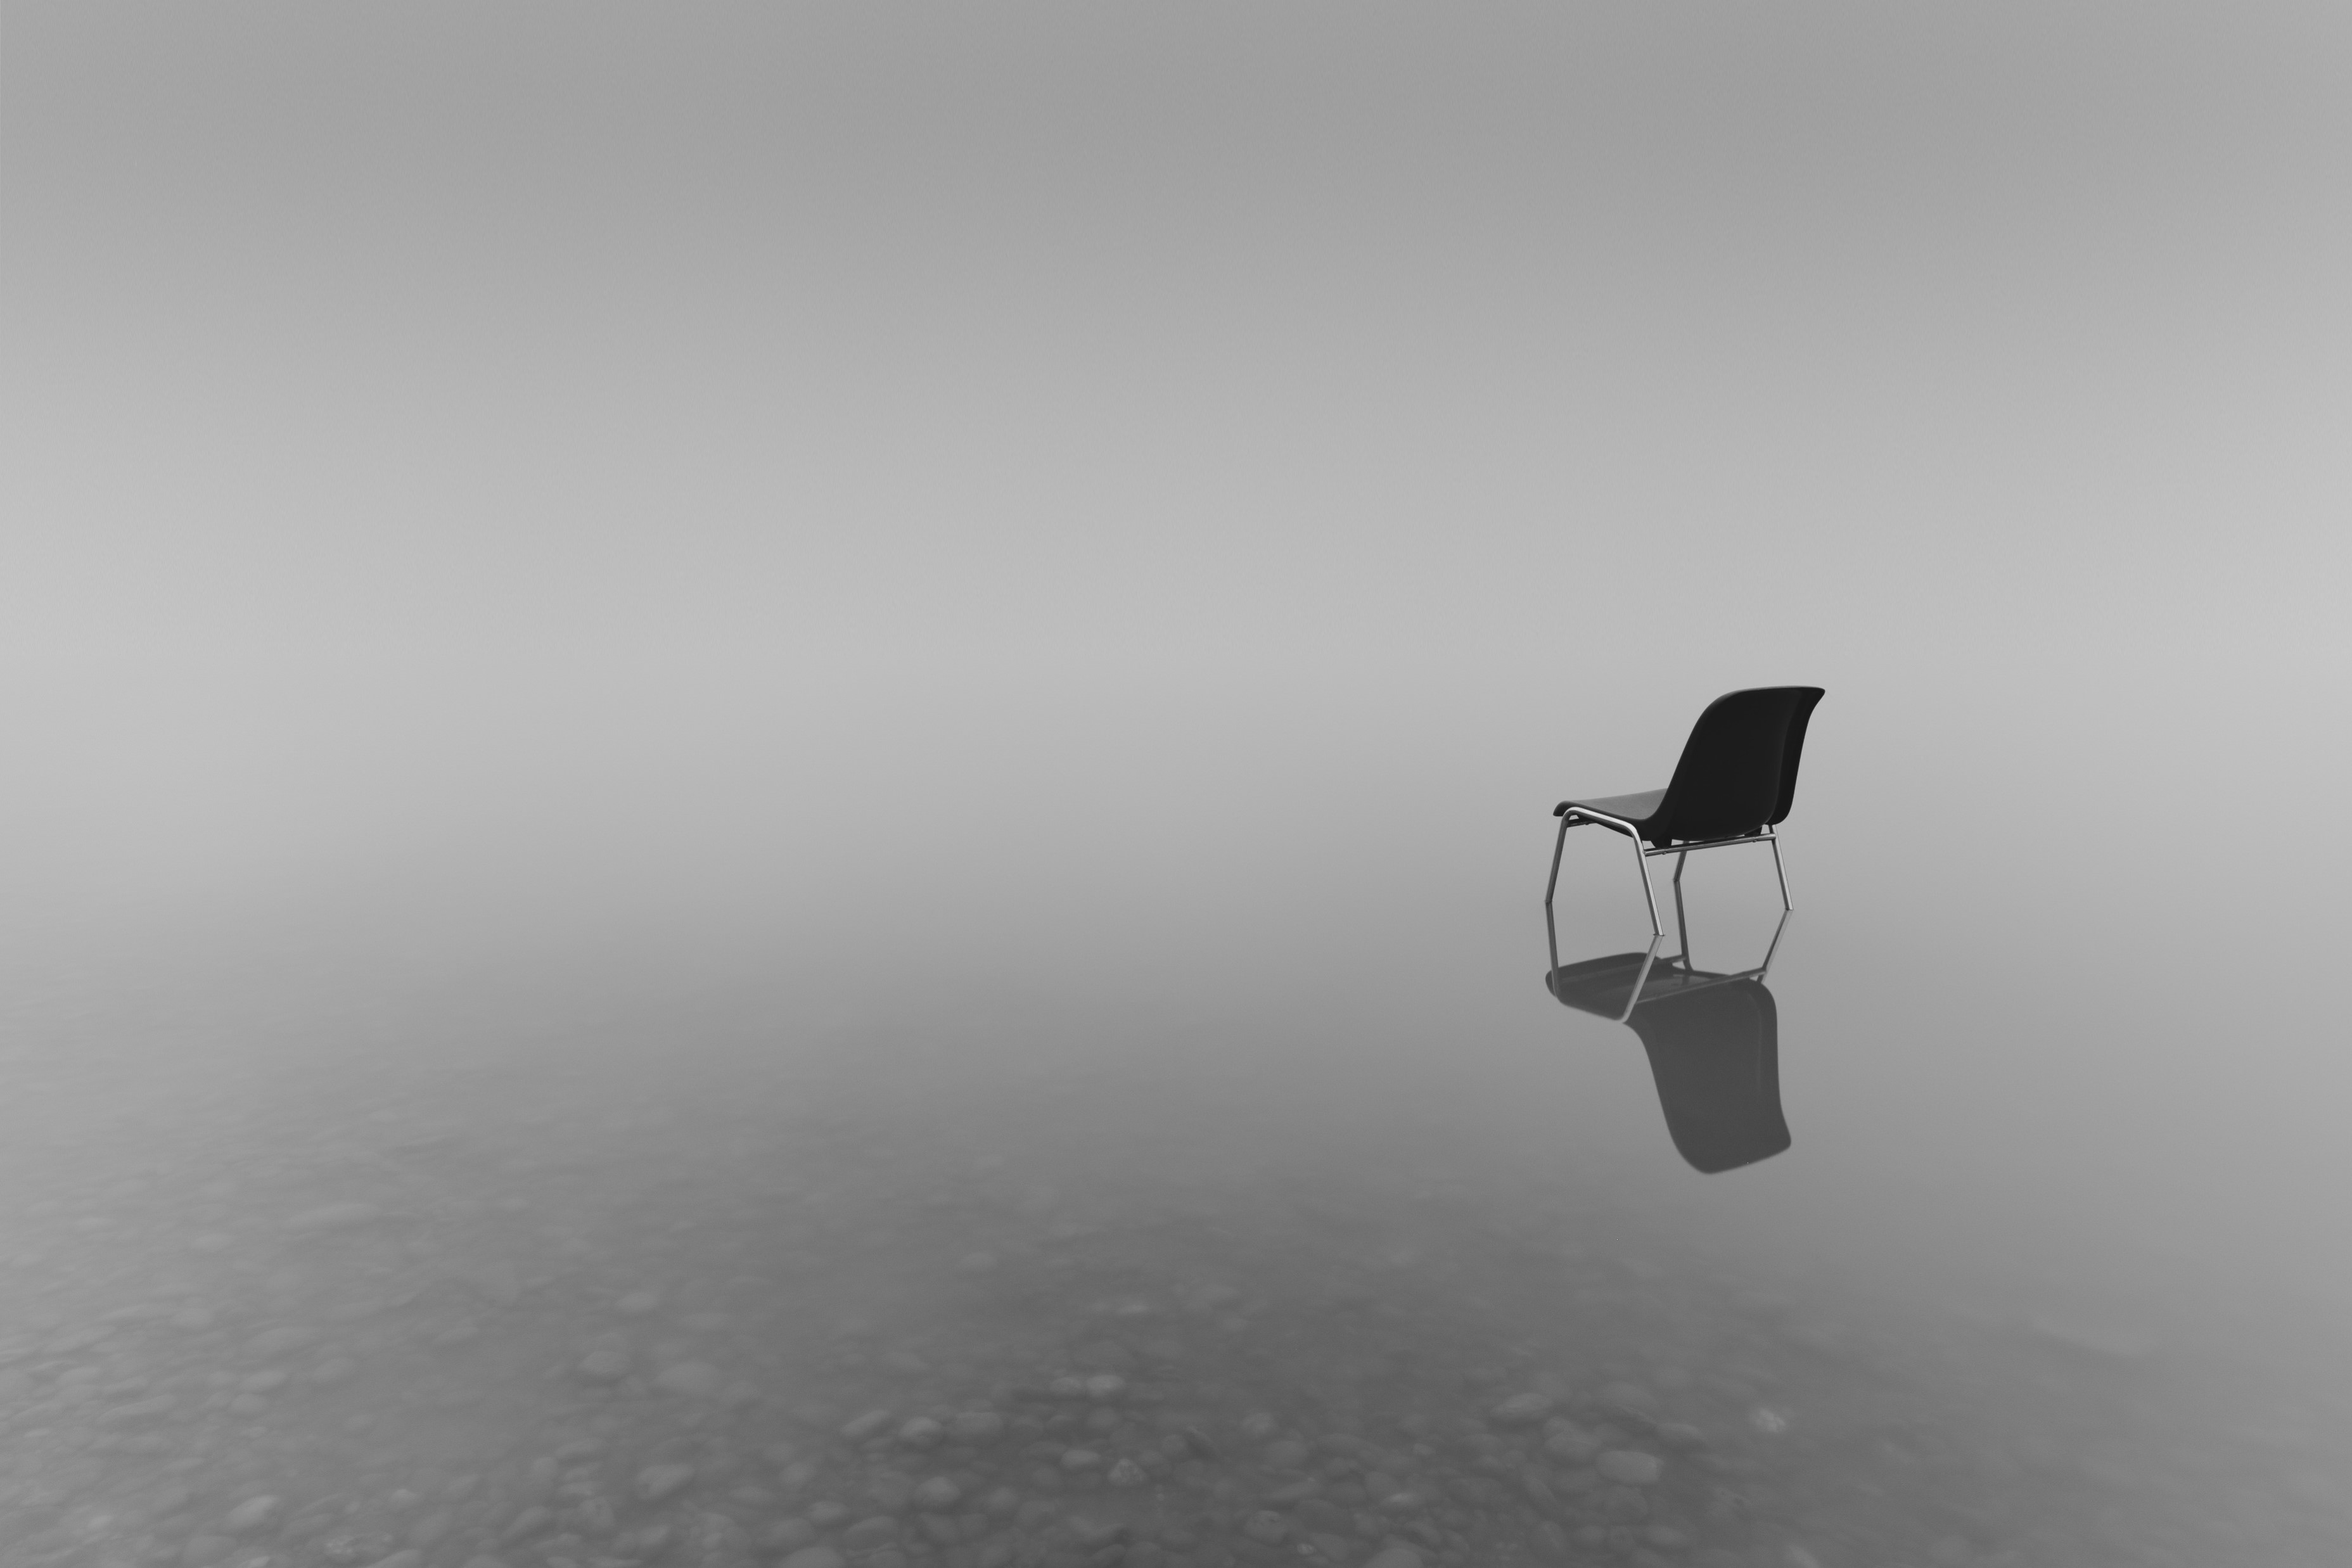 A chair in the water